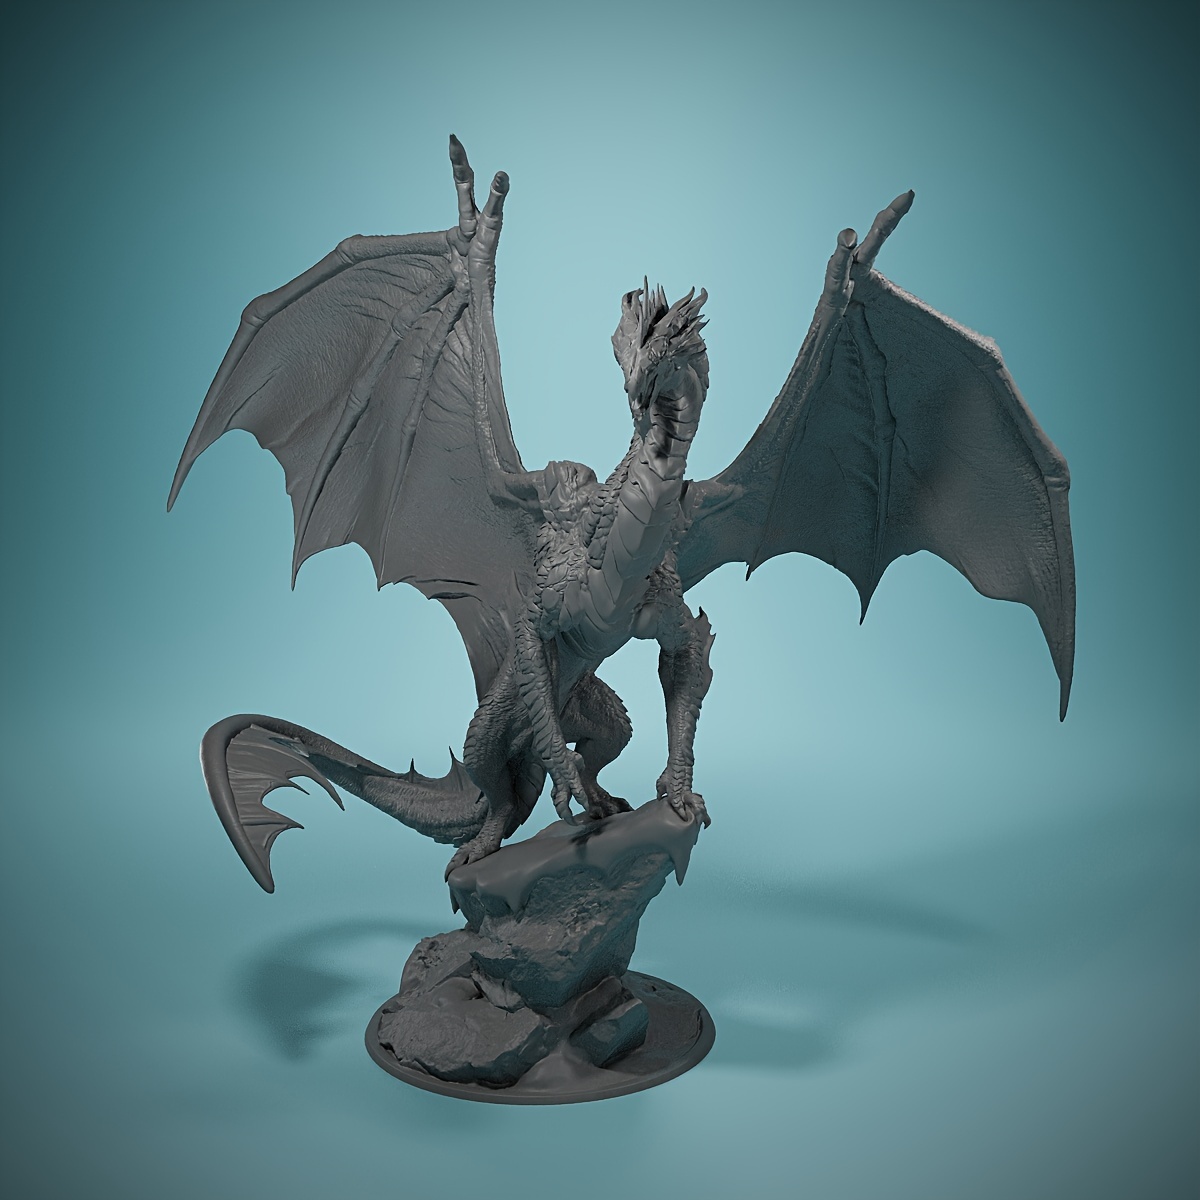 

Fantasy Resin Dragon Miniature For D&d, Tabletop Rpgs – 14+ Age Group – Detailed 3d Printed Silver Dragon Figurine For Game Room Decor And Roleplaying – Unpainted Collector's Dragon Model Kit